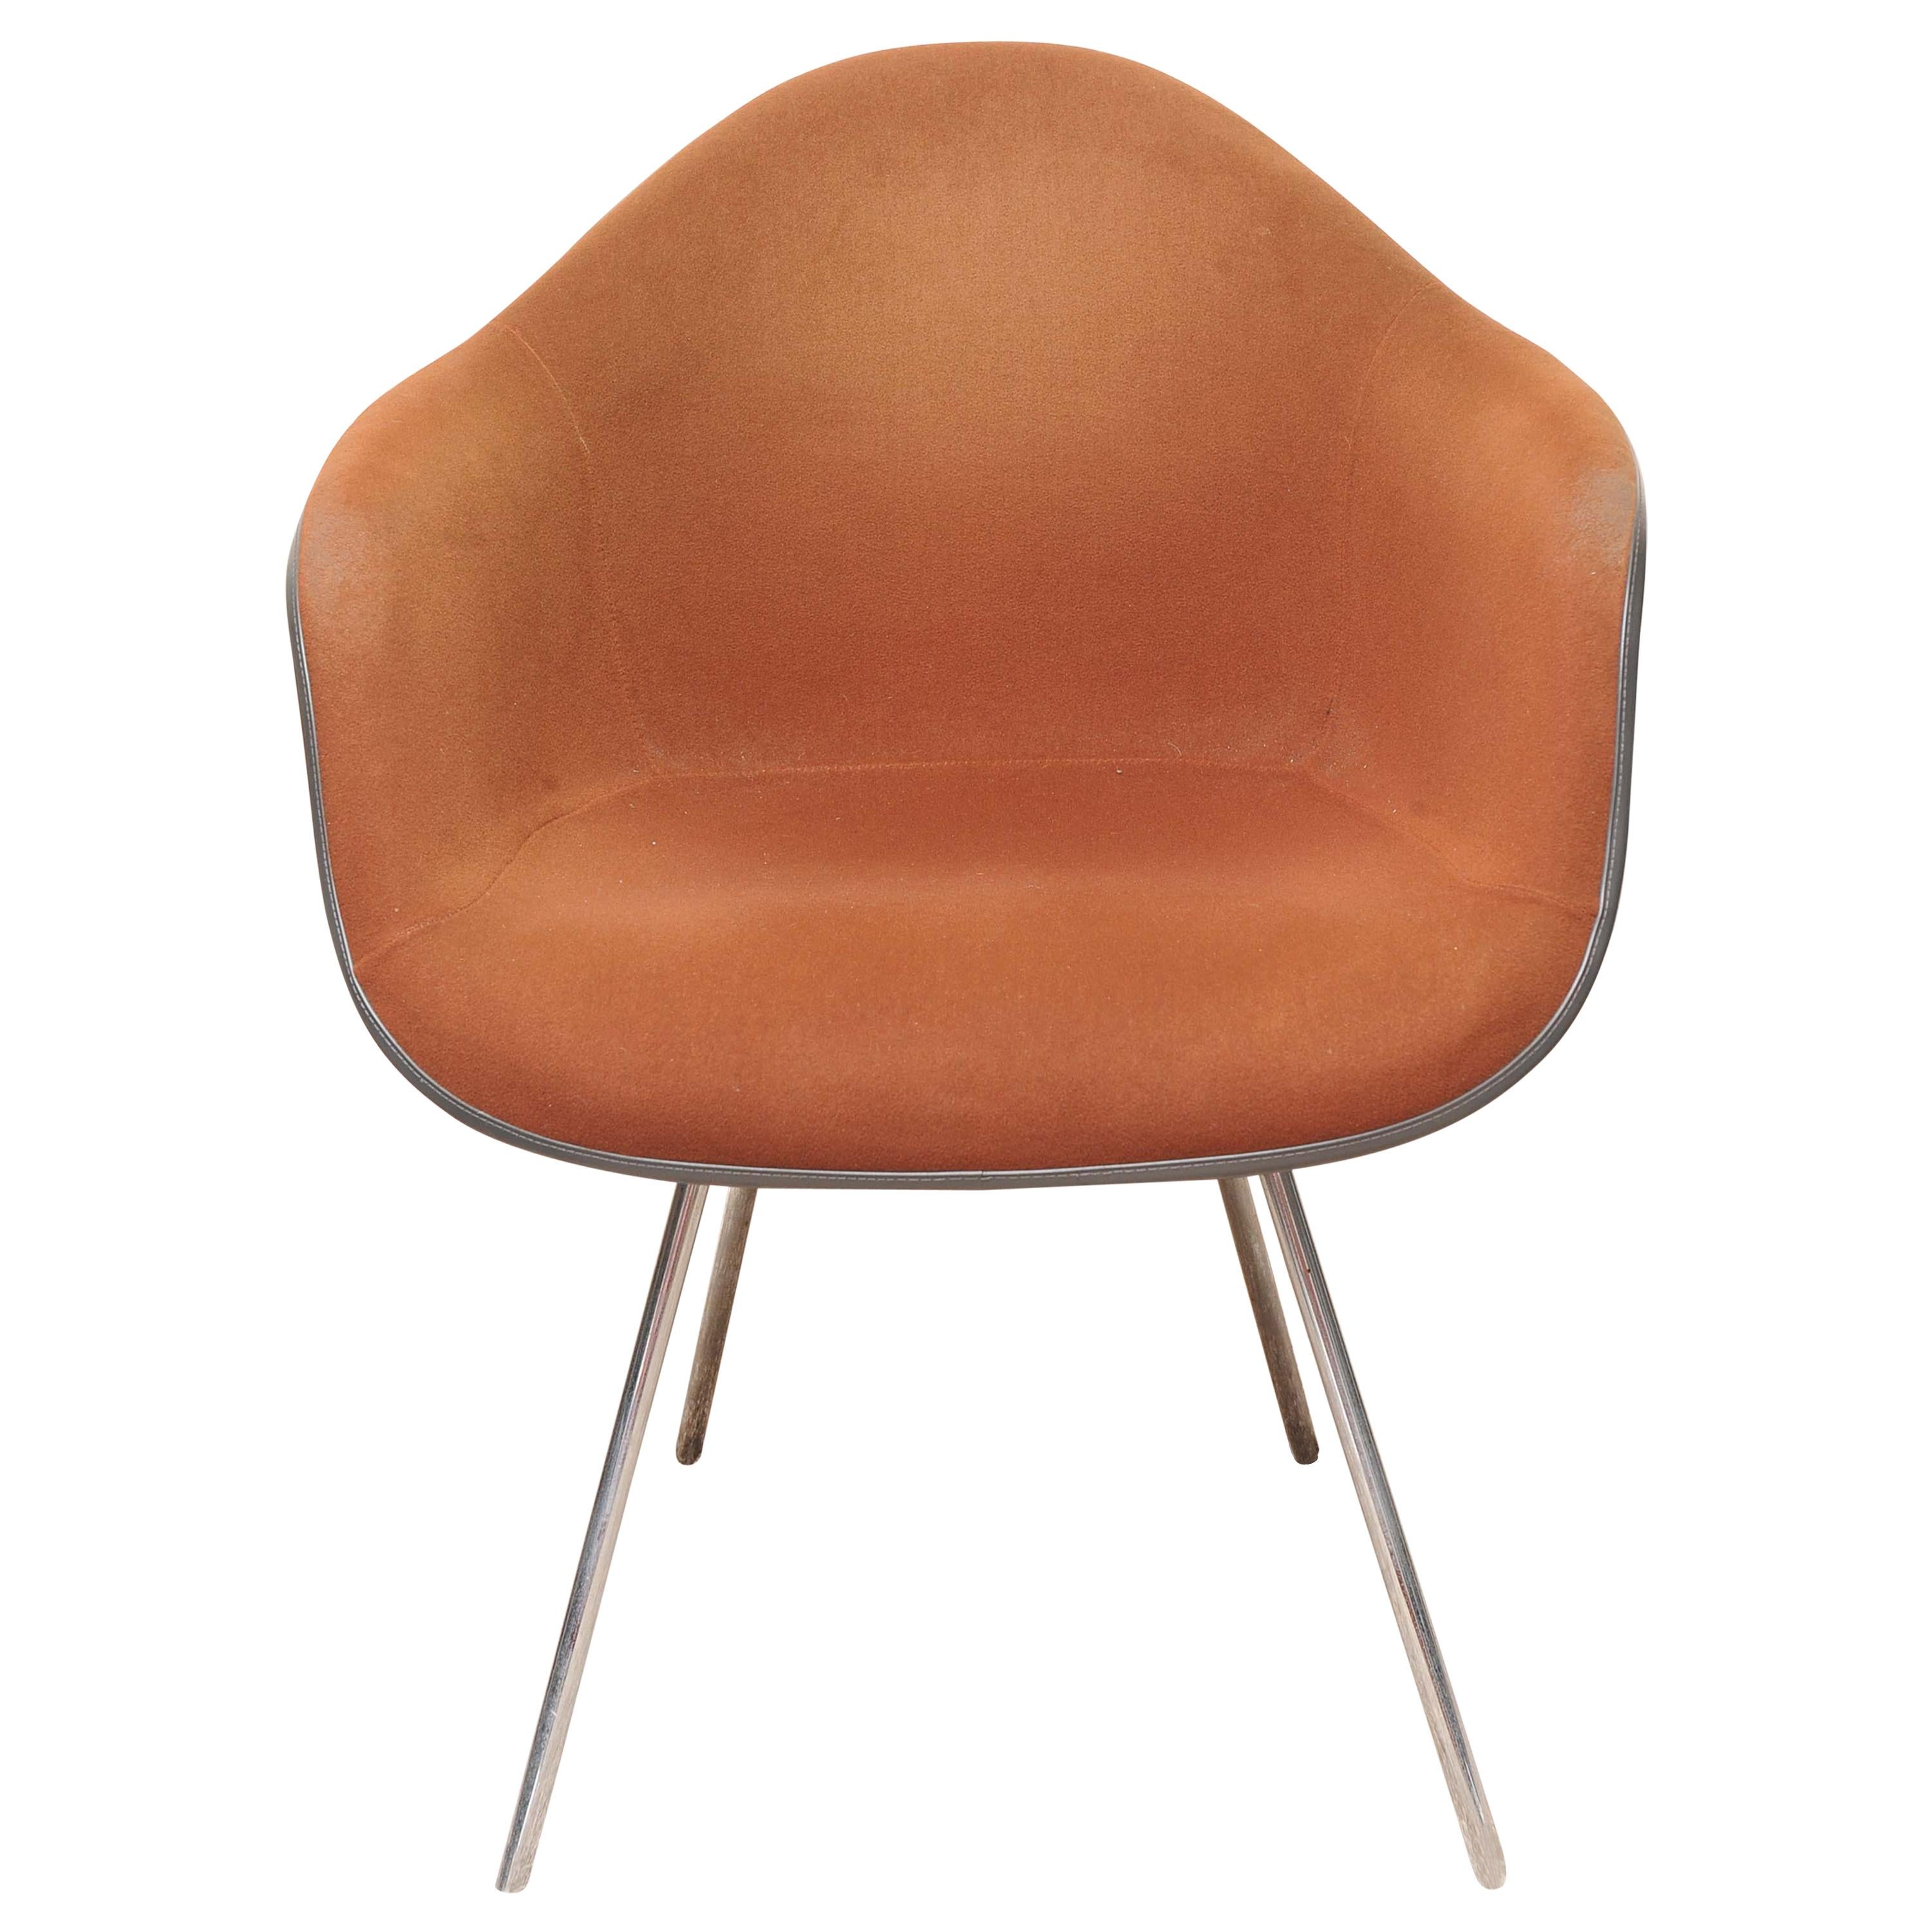 Original Charles & Ray Eames for Herman Miller DAX Chair with Manufacturers Mark For Sale